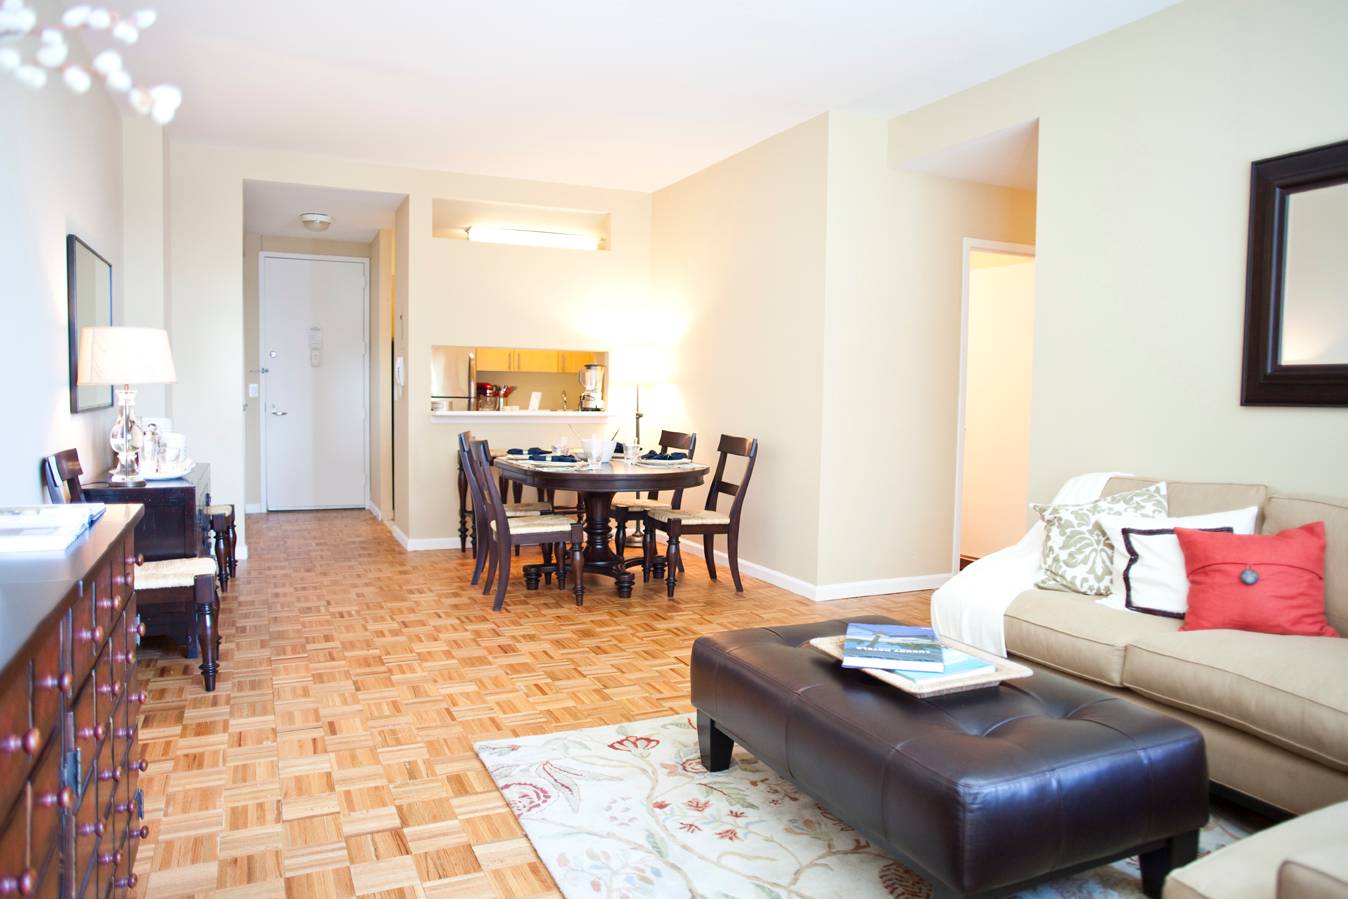 Newly Listed Financial District Flex 2 Bedroom Rental Apartment!